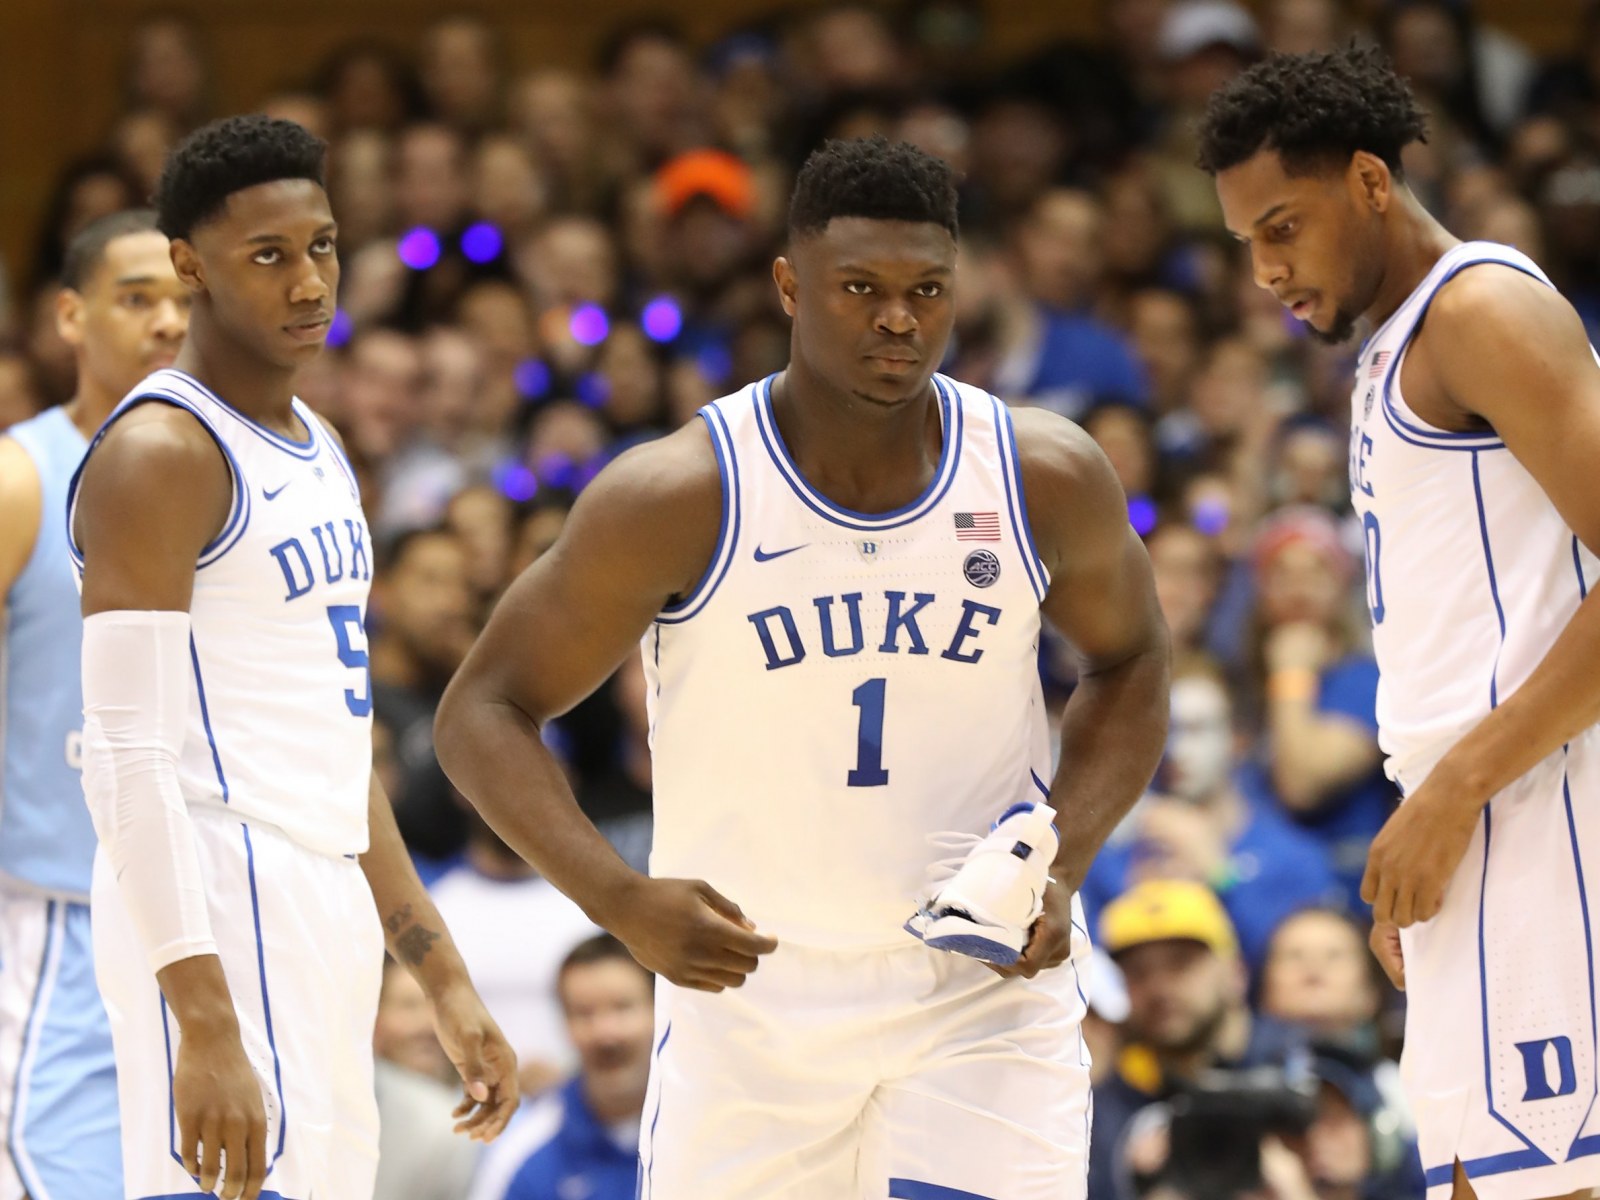 Nike Blowout: $1.12 Billion Wiped Swoosh Brand's Stock after Zion Williamson's Injury